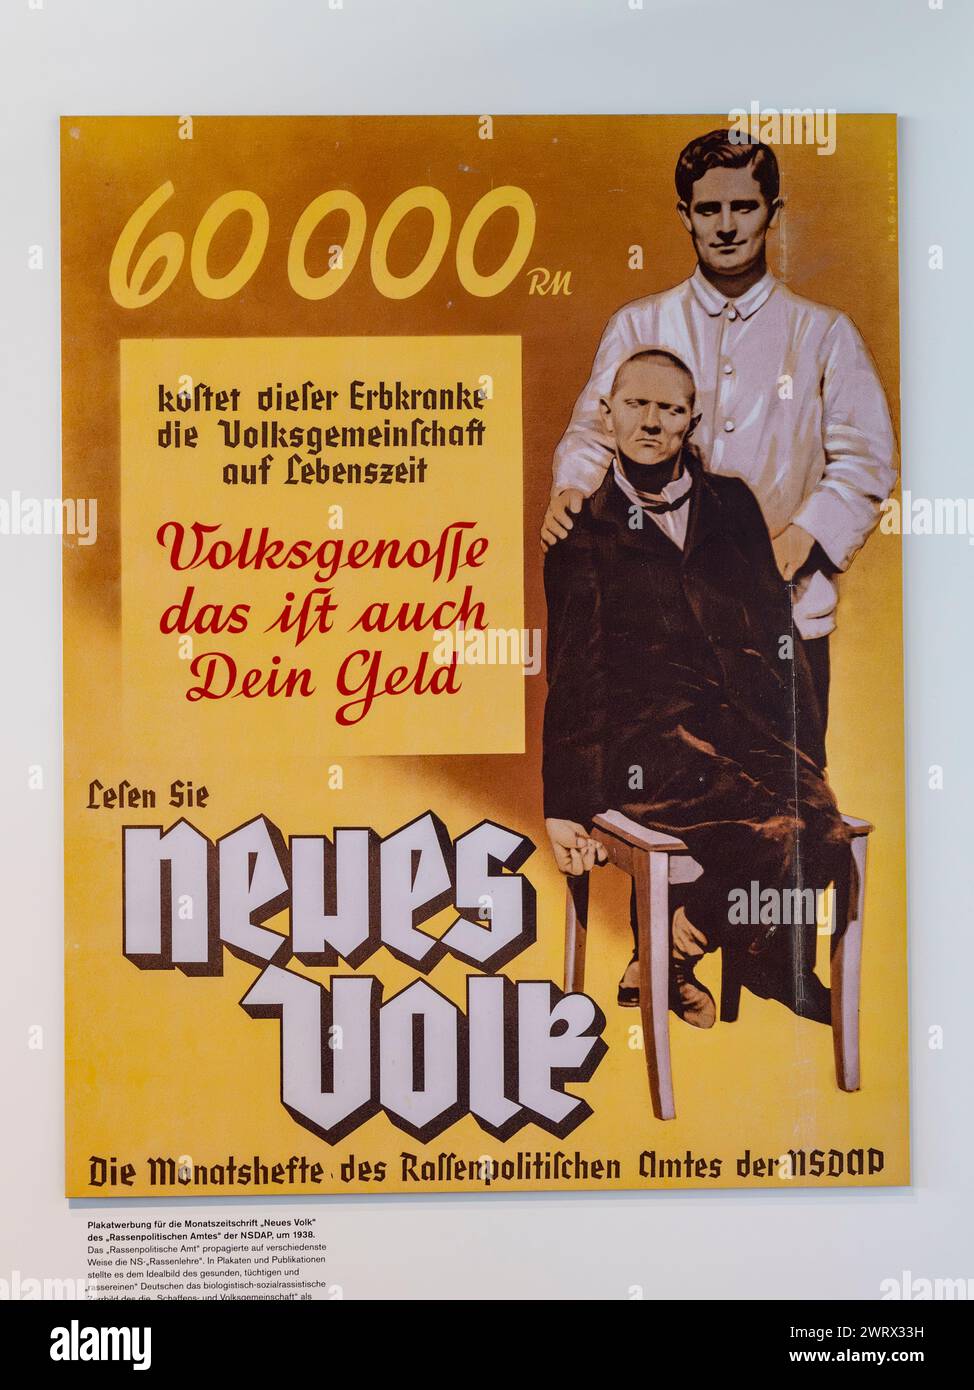 Advertising poster for 'Neues Volk' magazine by the Nazi Party's 'Racial Policy Office' in 1938, Topography of Terror, Berlin, Germany, Stock Photo